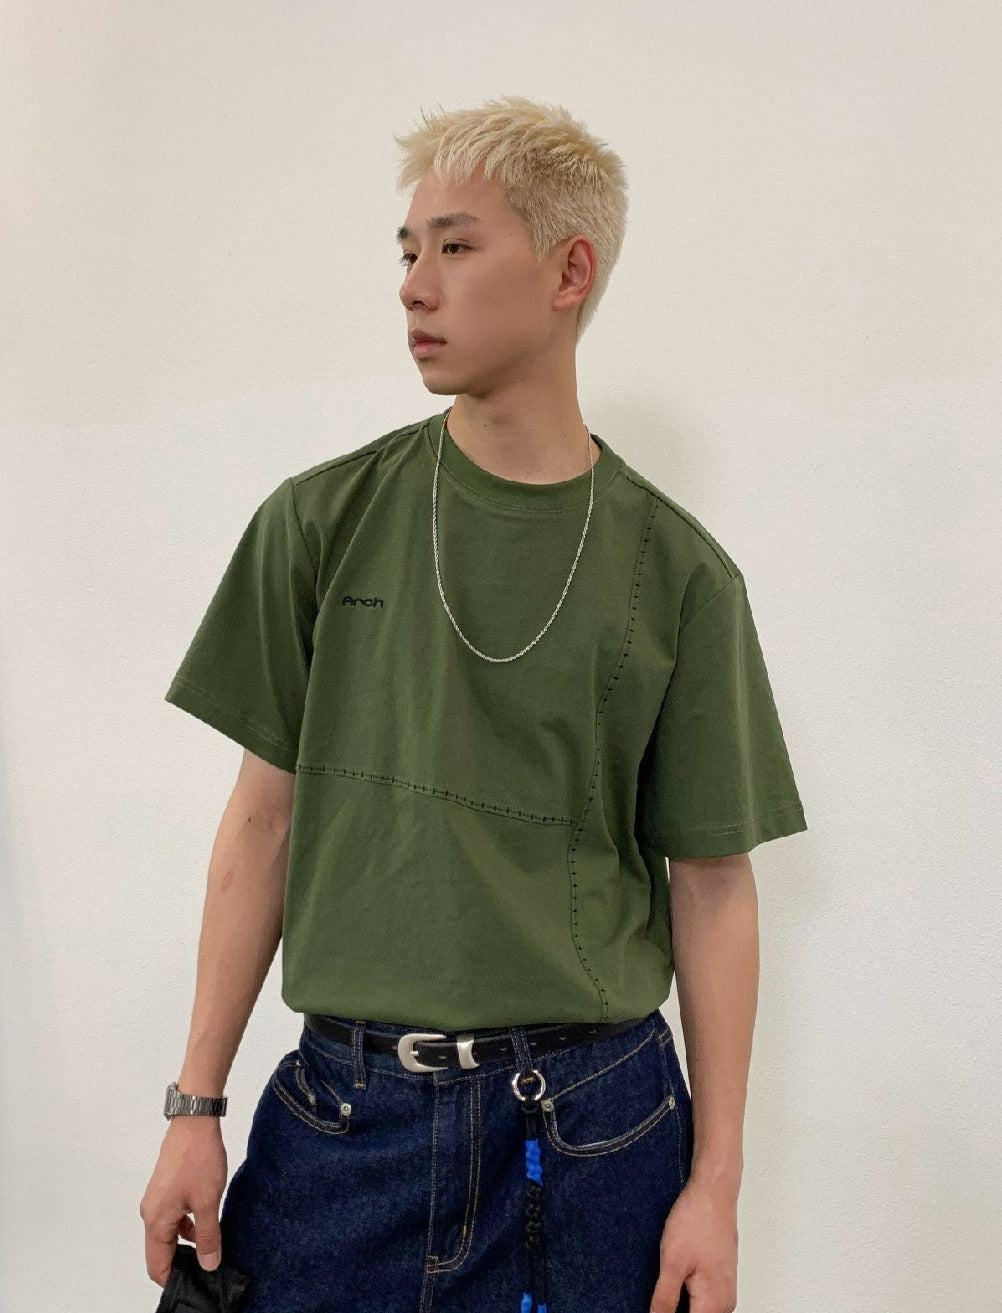 Stitched Cut Lines T-Shirt Korean Street Fashion T-Shirt By Roaring Wild Shop Online at OH Vault